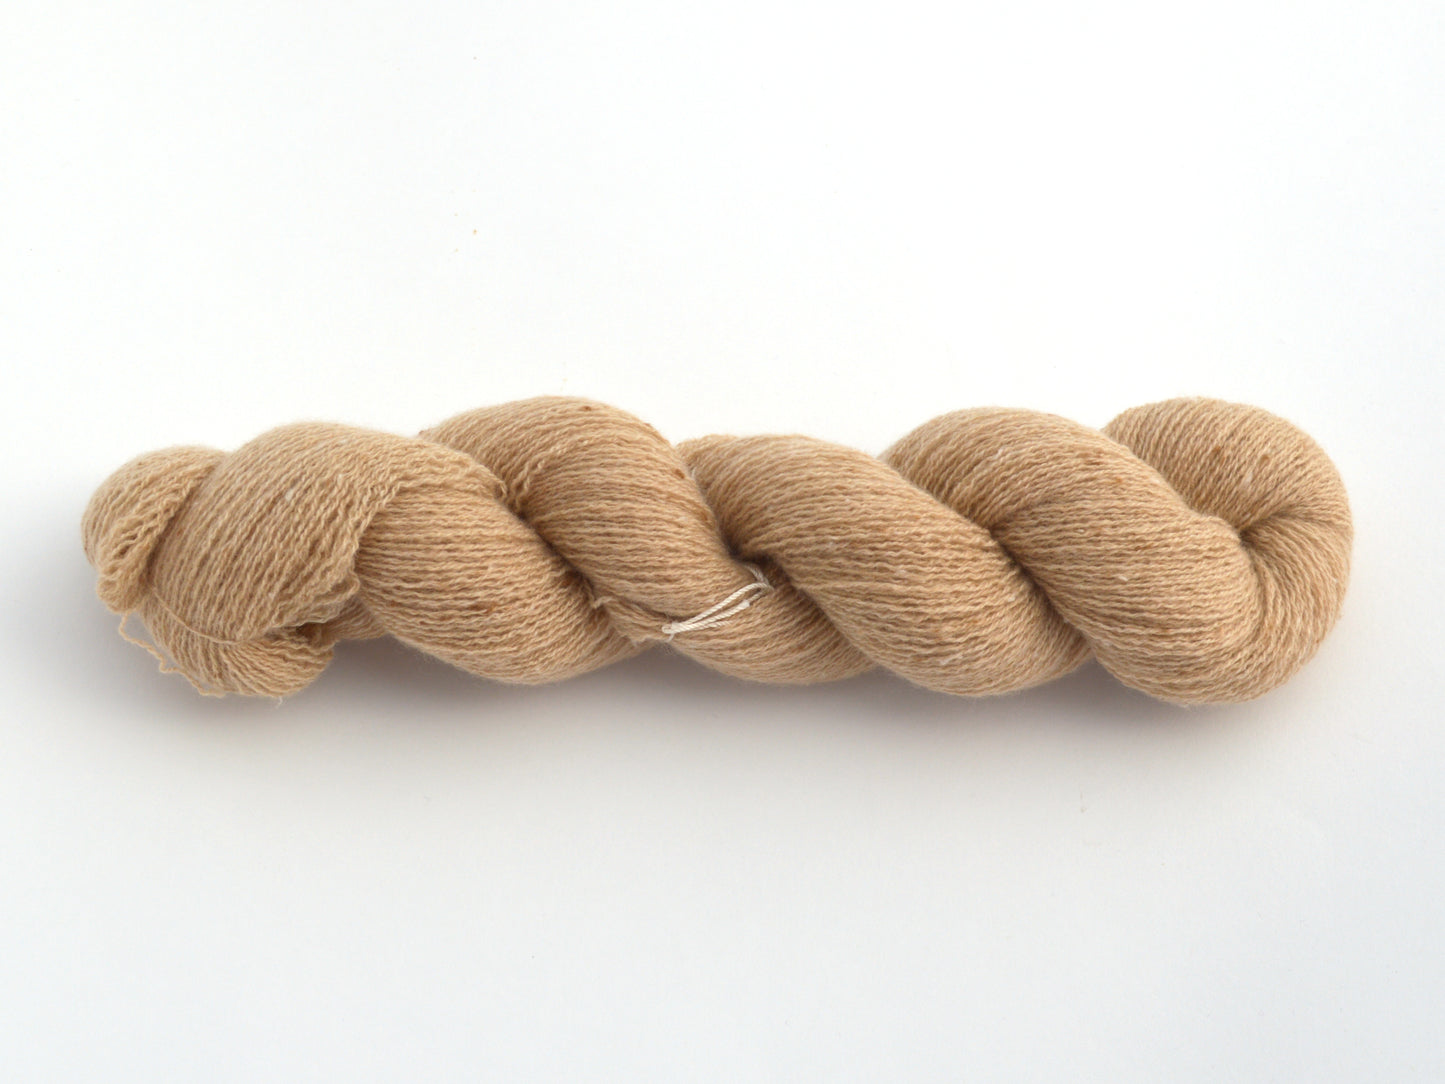 Lace Weight Recycled Cashmere Yarn in Beige Tweed